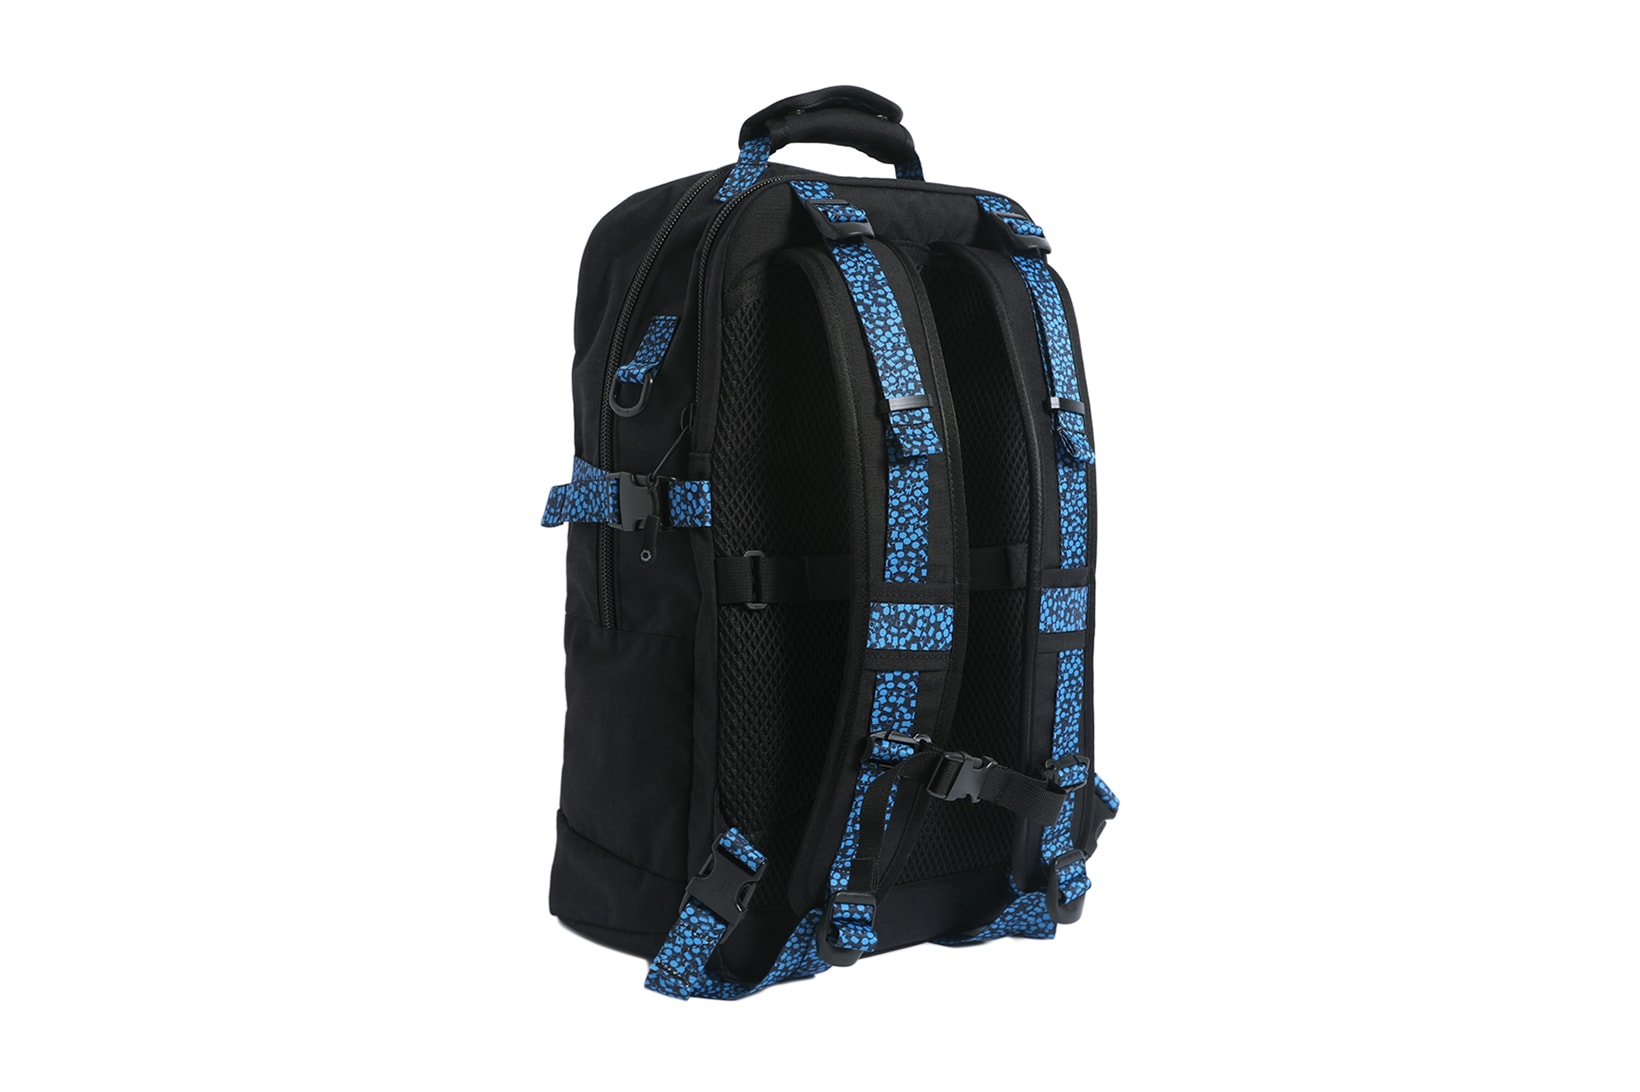 Stash DSPTCH Collaboration backpack tote strap april 24 2018 release date info drop